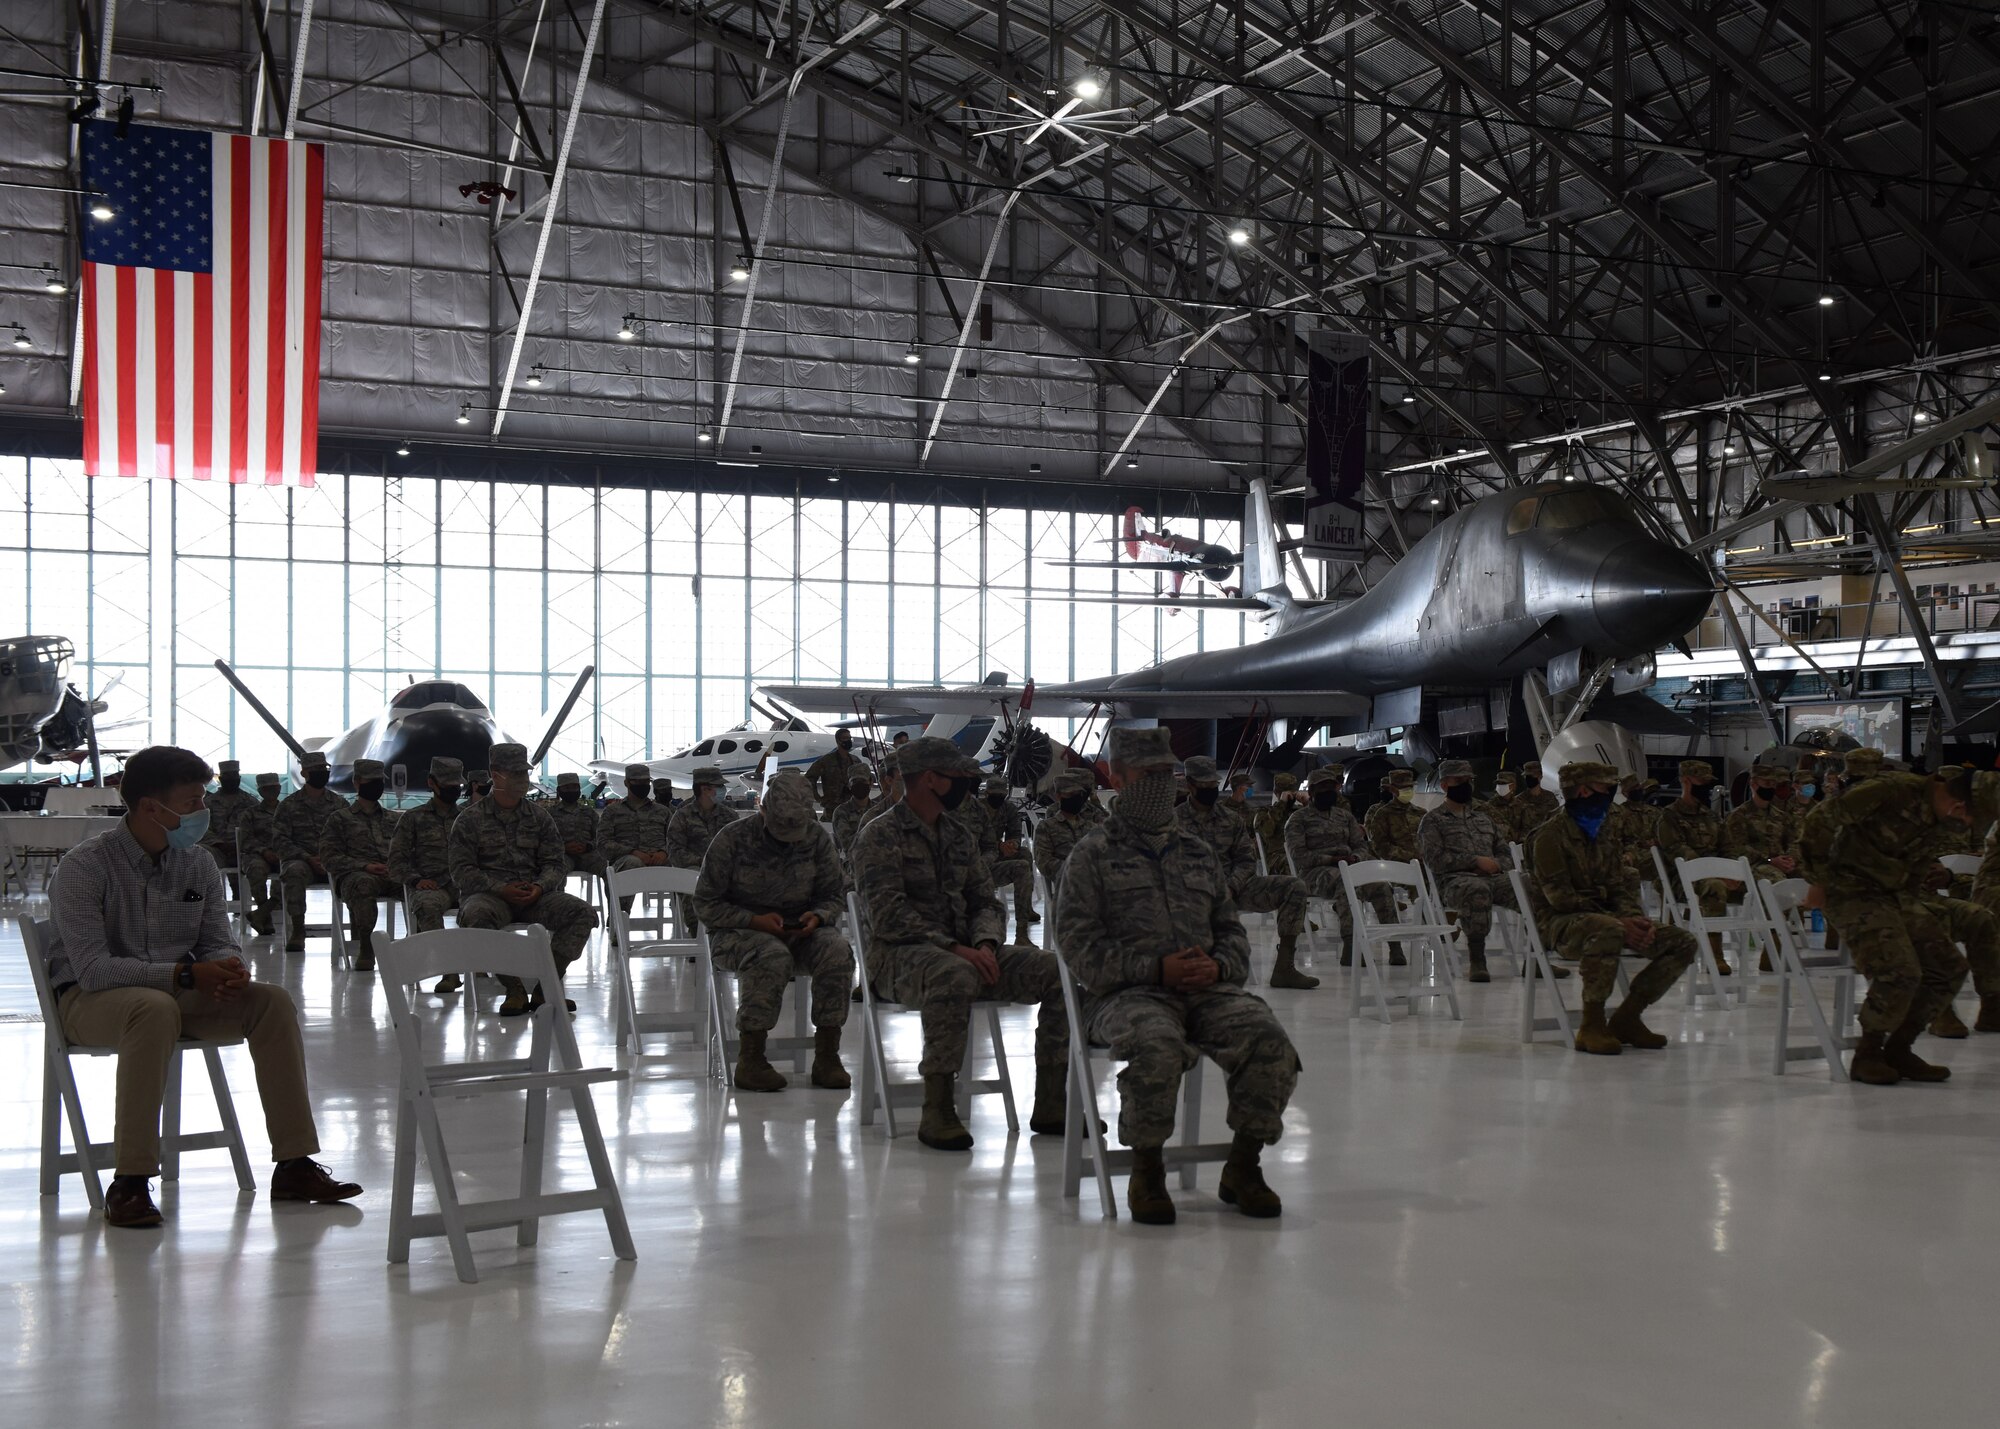 Members from the 11th Space Warning Squadron wait for the Induction into the U.S. Space Force Ceremony to begin at Wings Over the Rockies Air and Space Museum in Denver Sept. 1, 2020. Approximately 60 members from 11 SWS were inducted into the USSF. (U.S. Air Force photo by Airman 1st Class Haley N. Blevins)